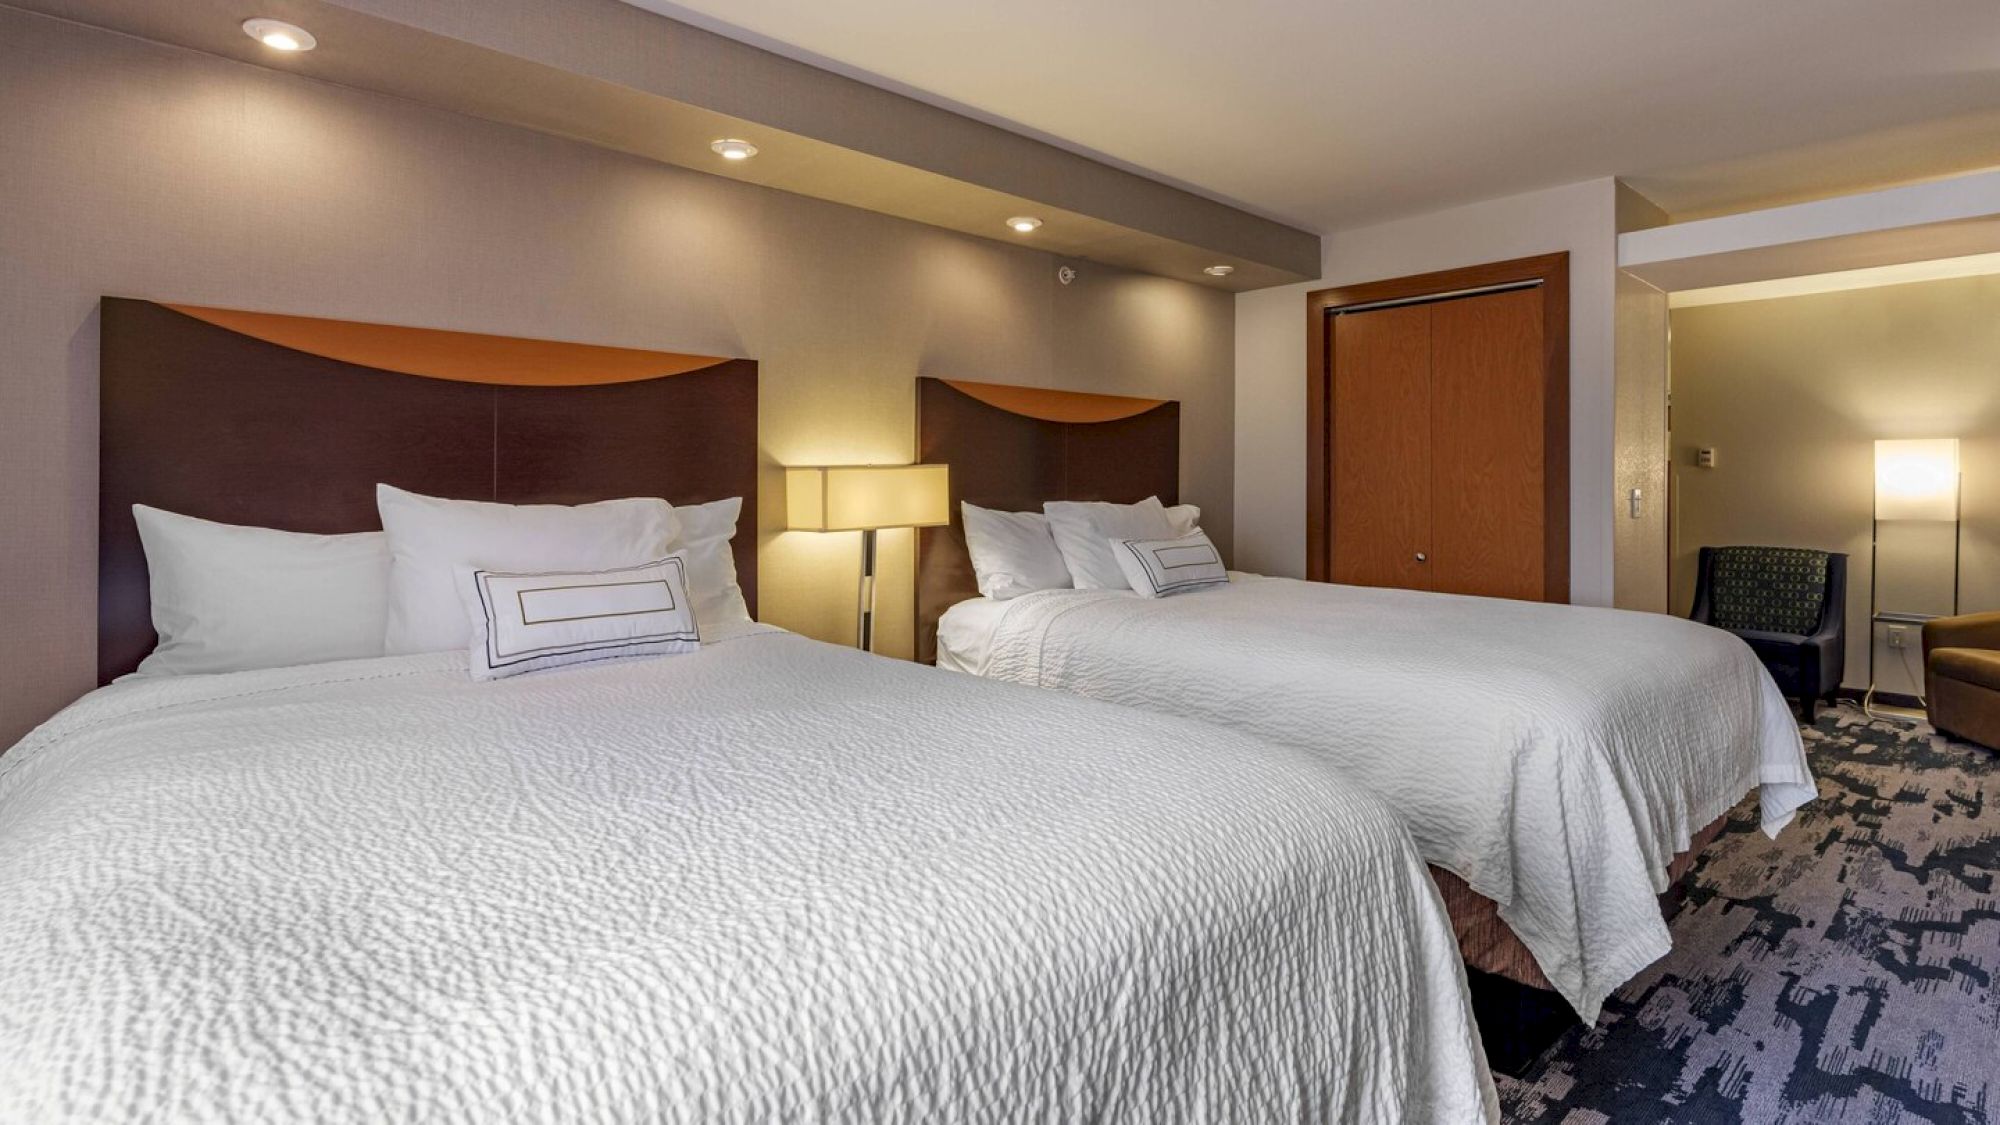 The image shows a hotel room with two large beds, wall-mounted headboards, white bedding, a lamp between the beds, and modern decor.